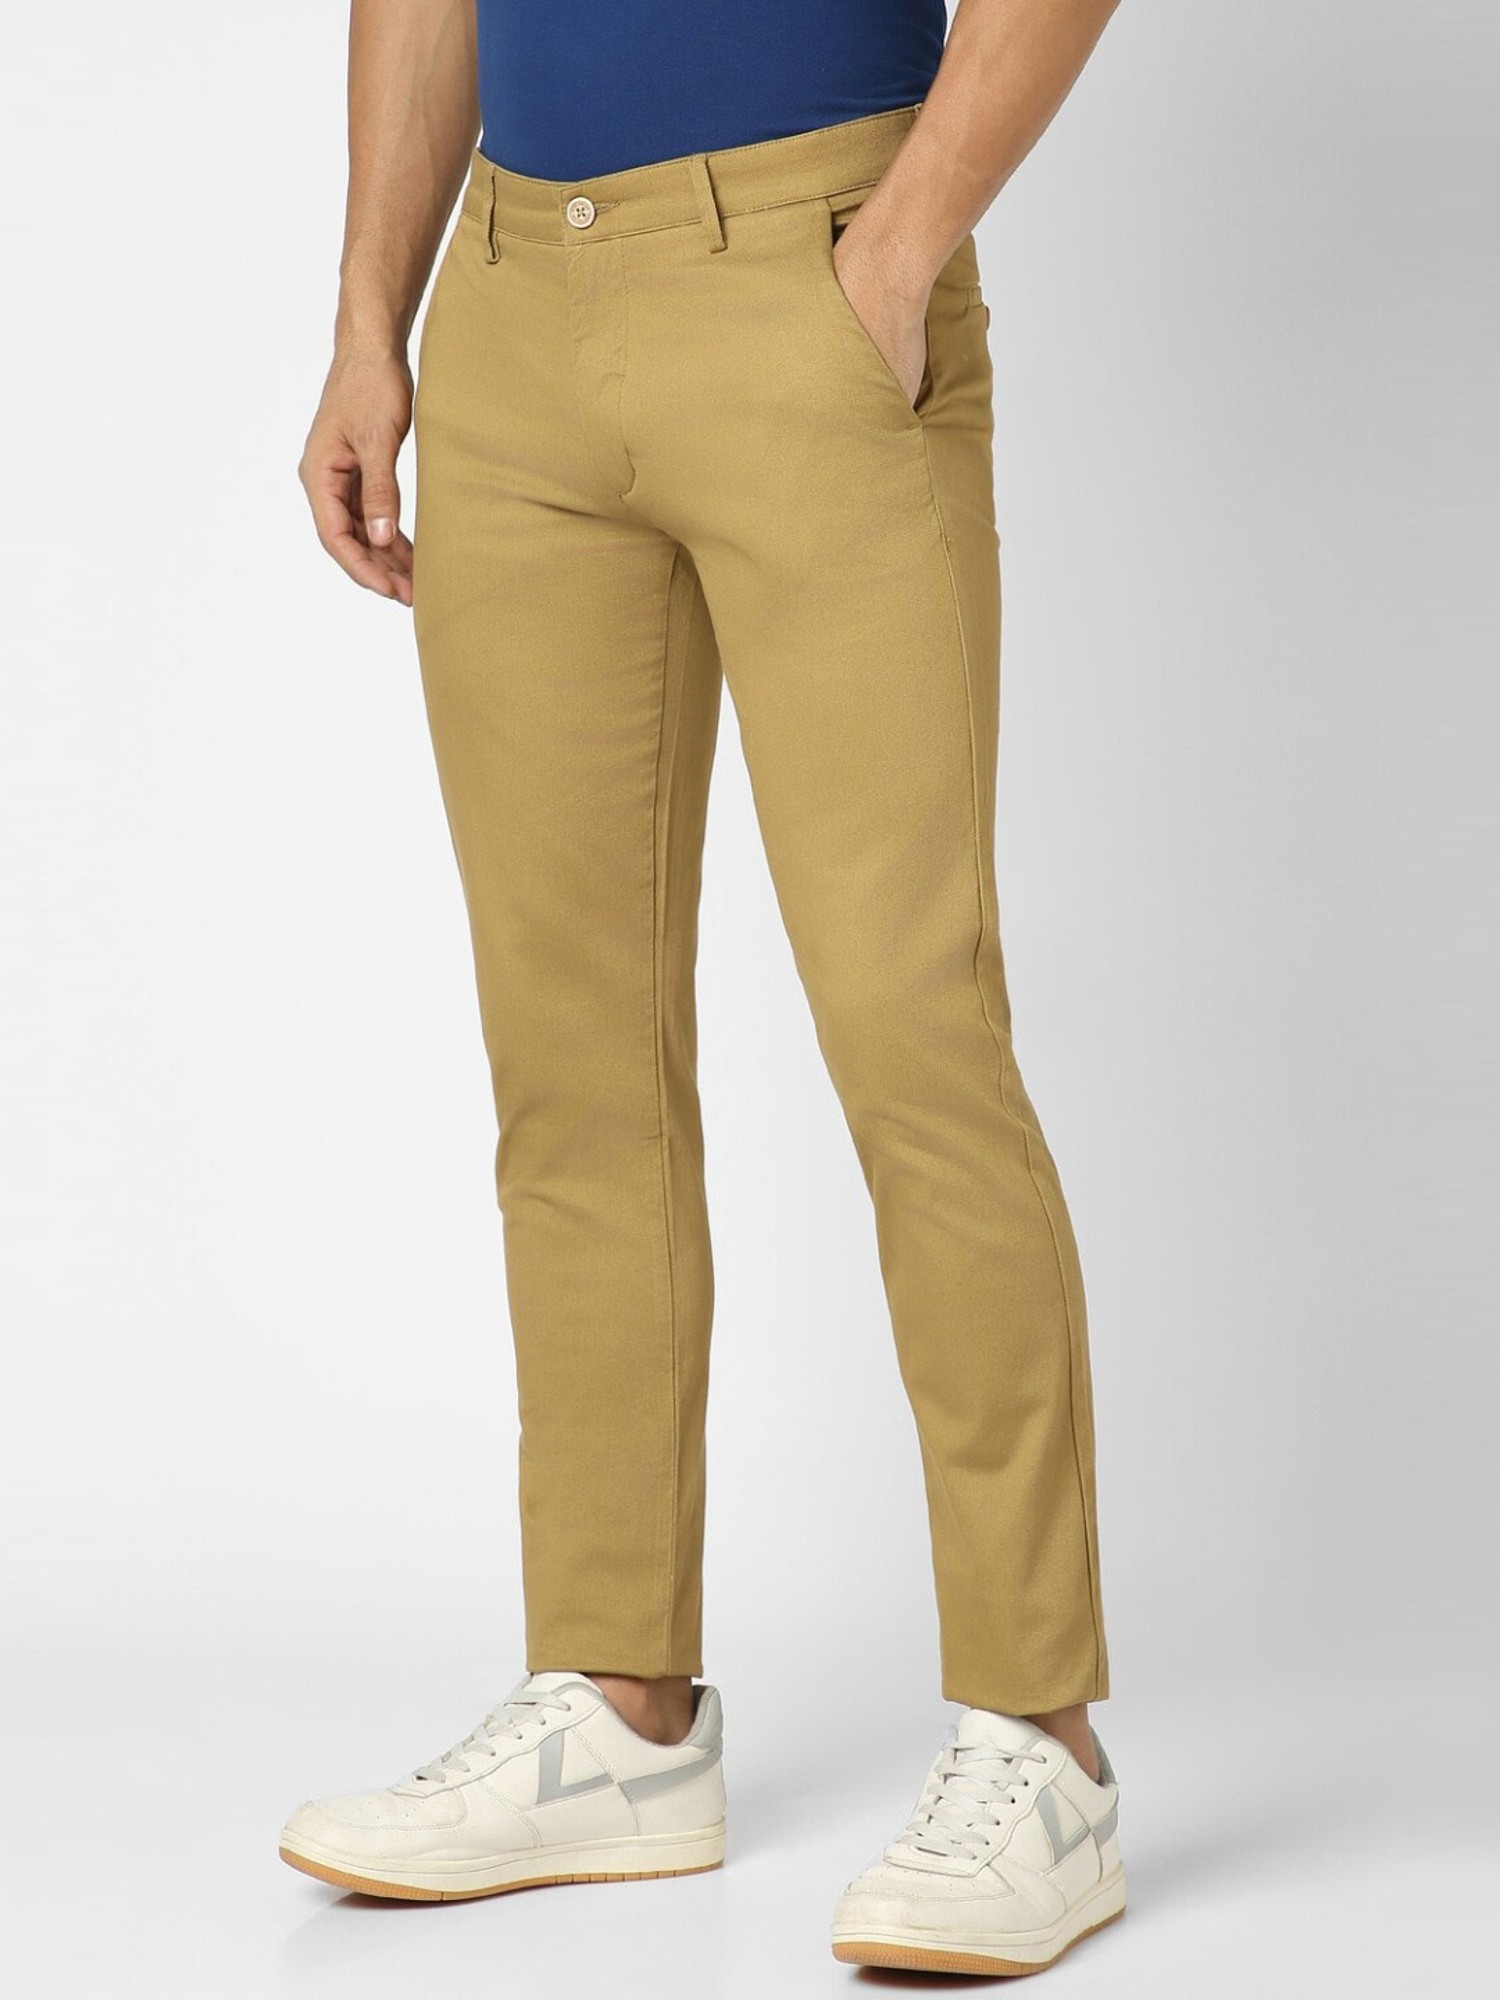 Peter England Formal Trousers  Buy Peter England Men Khaki Textured Slim  Fit Formal Trousers Online  Nykaa Fashion